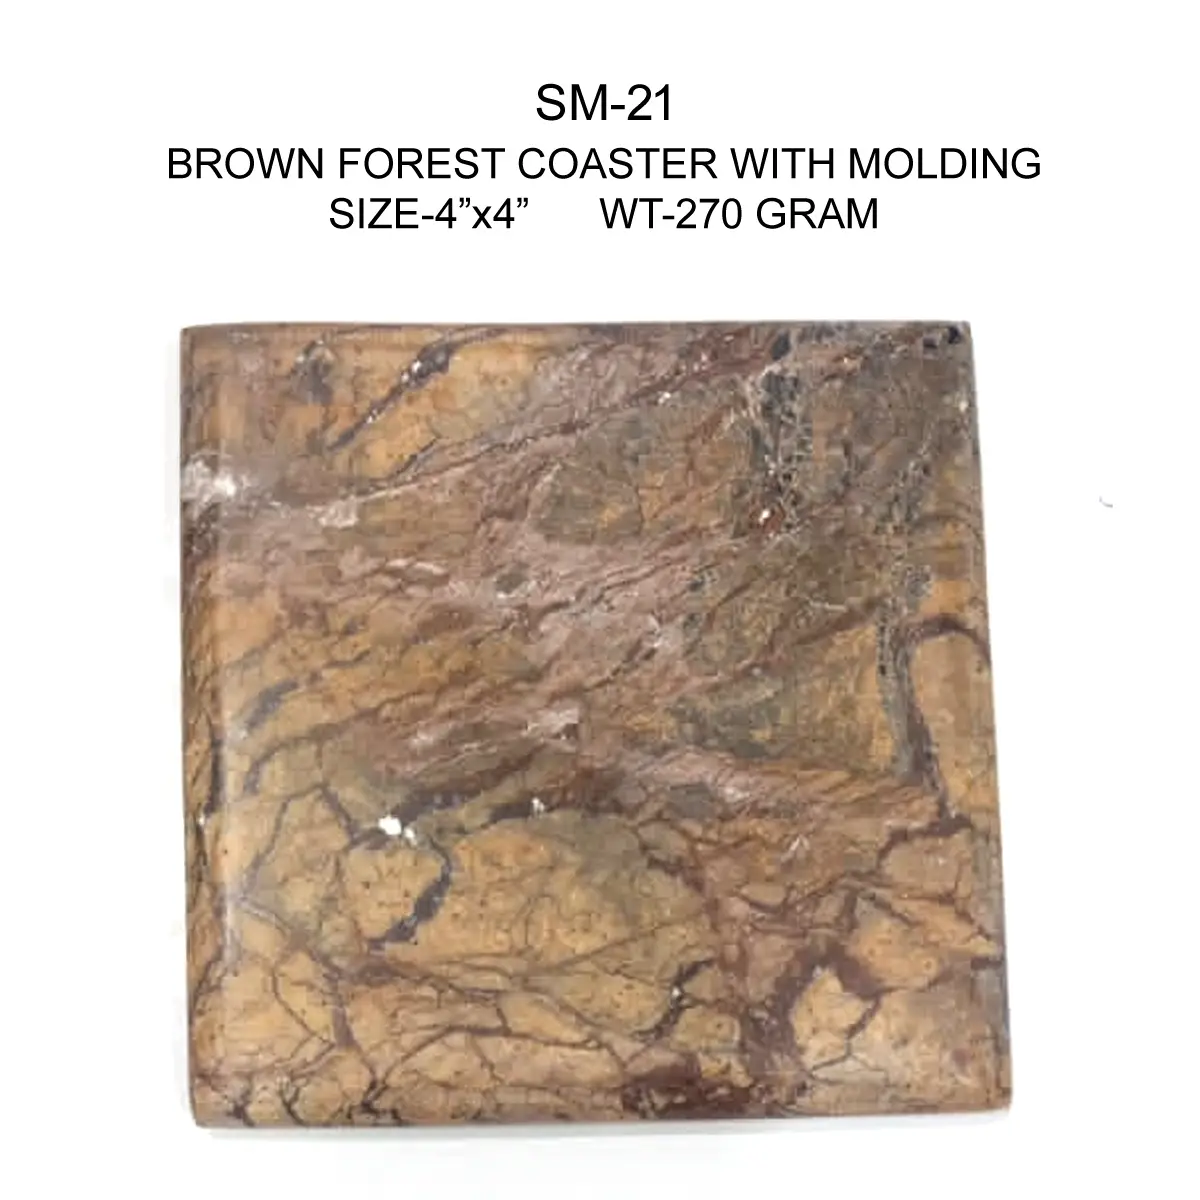 BROWN FOREST COASTER WITH MOLDING